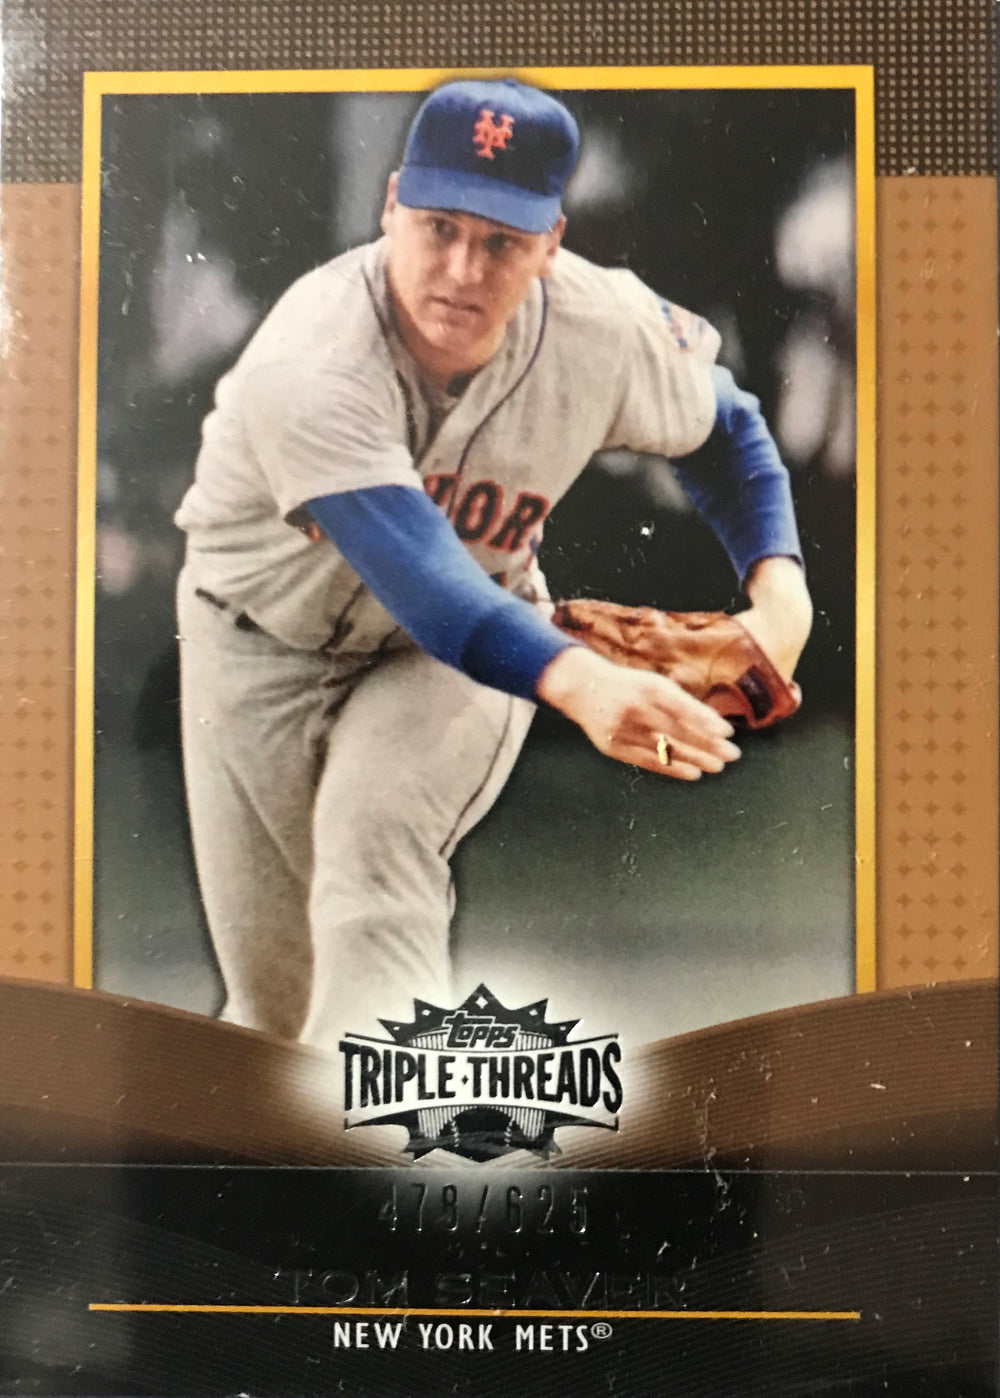 Tom Seaver 2011 Topps Triple Threads Sepia Series Mint Card #84.  #478 of 625 made